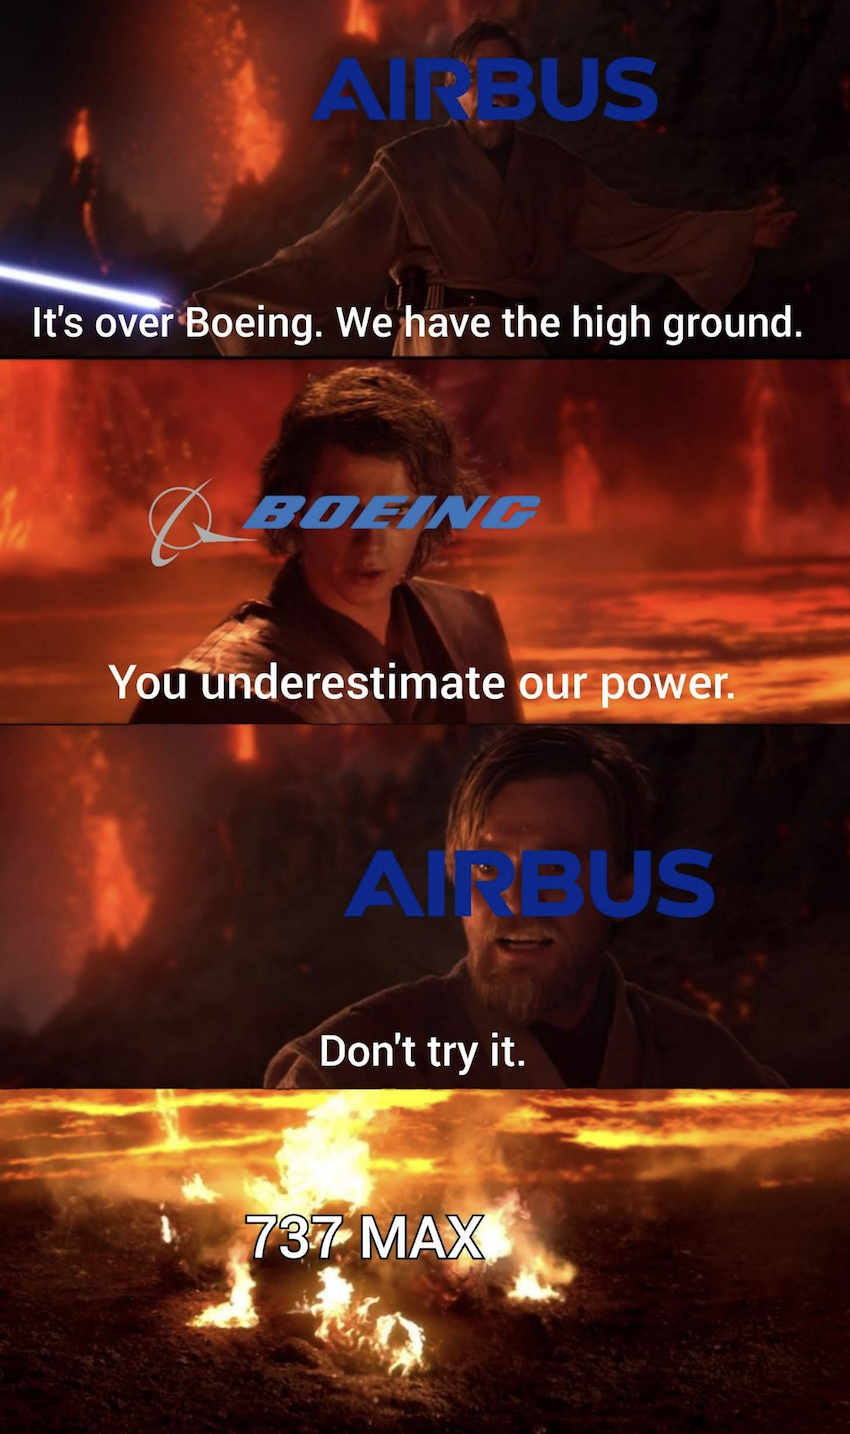 intel overclock meme - Airbus It's over Boeing. We have the high ground. Boeing You underestimate our power. Airbus Don't try it. 737 Max